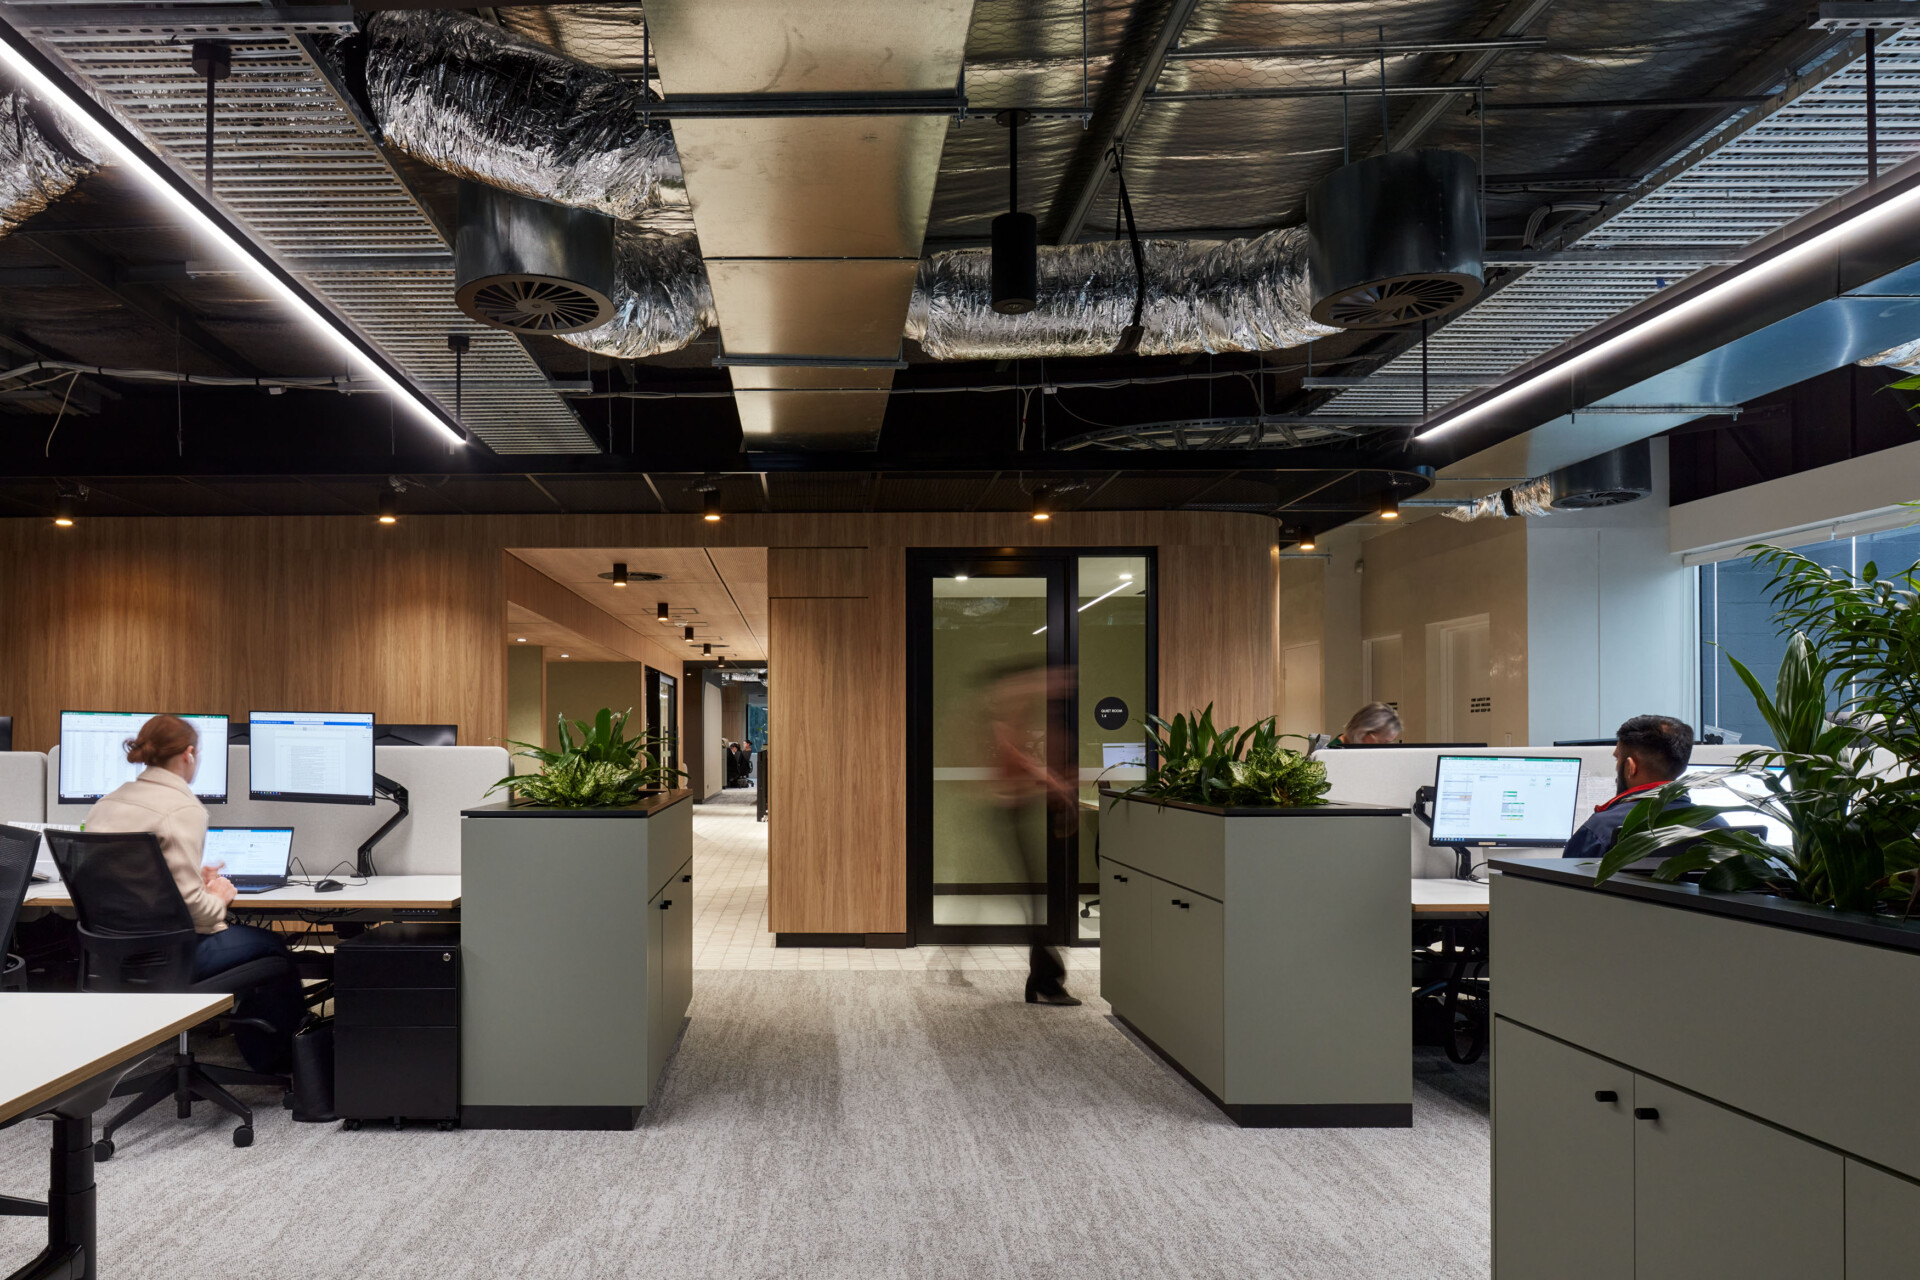 One of the open plan workspaces. Staff sit at standing and sitting desks working in front of screen. You can peek into a quiet room adjoining the workspace through its glazed door and sidelight. A corridor leads to the other end of the floor with a peak into work booths along its length. Planter boxes with oxygen purifying plants top each work bank.